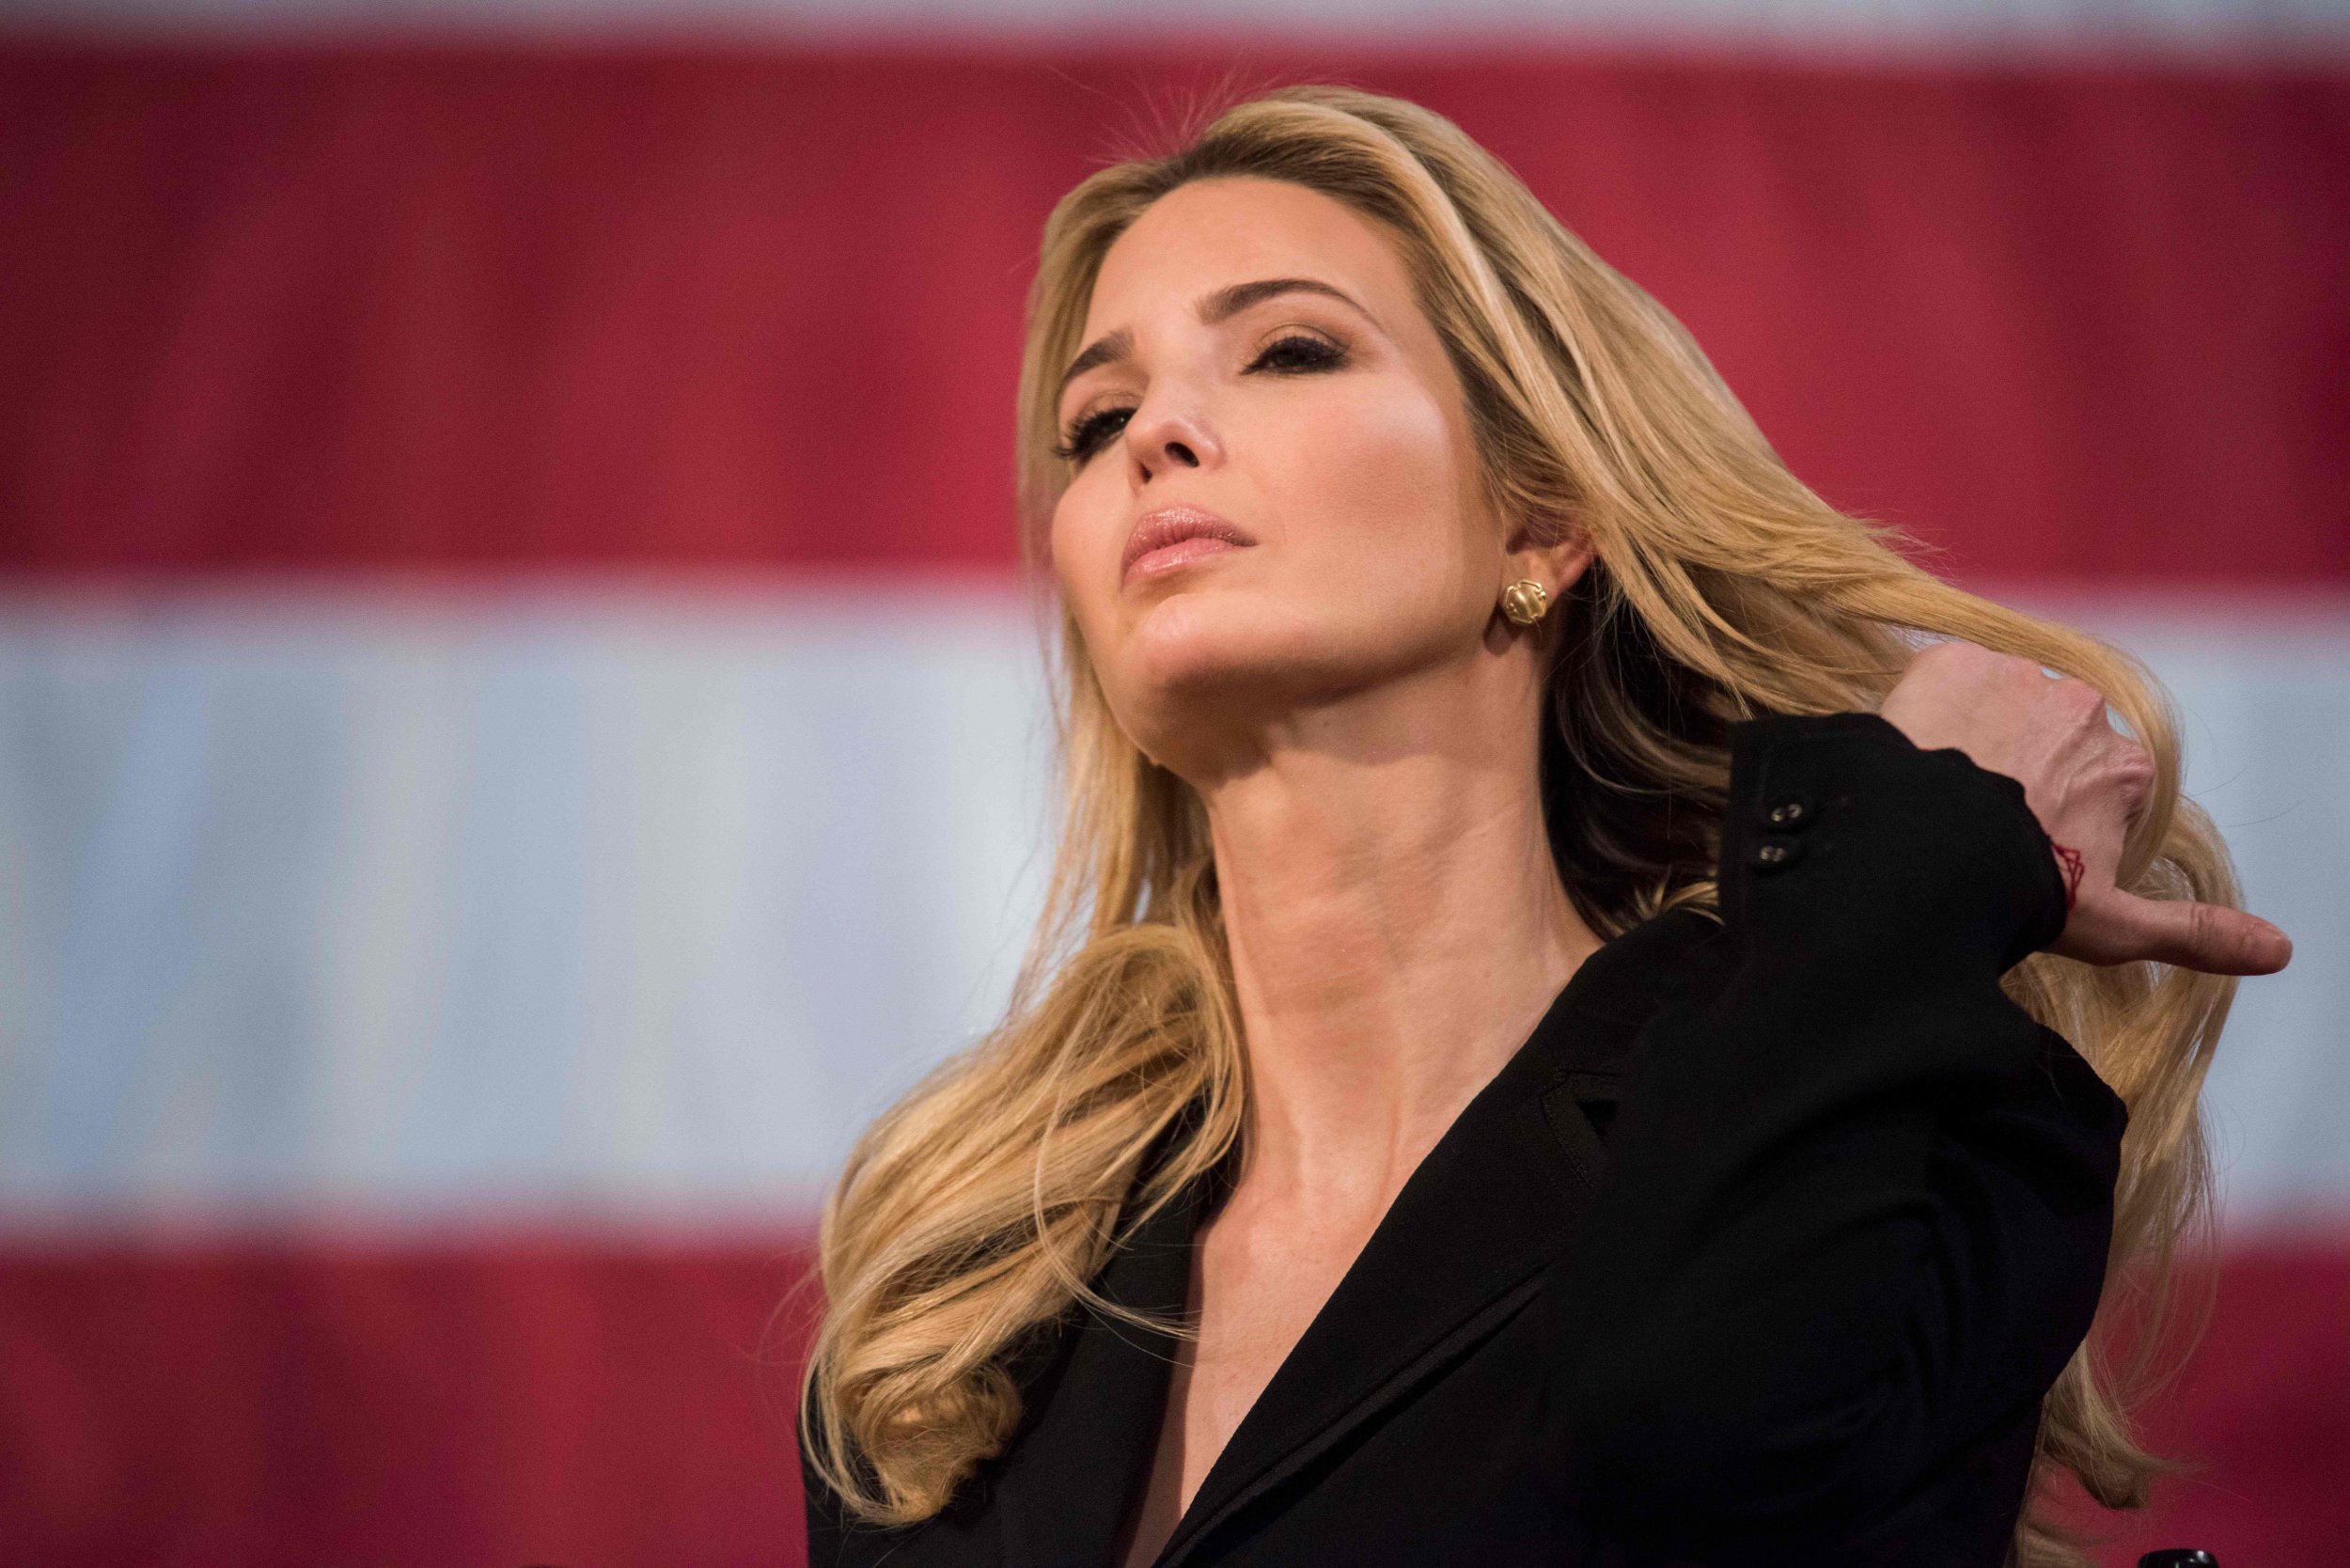 People Aren't Buying Ivanka Trump's Clothes in Stores, so Now She is